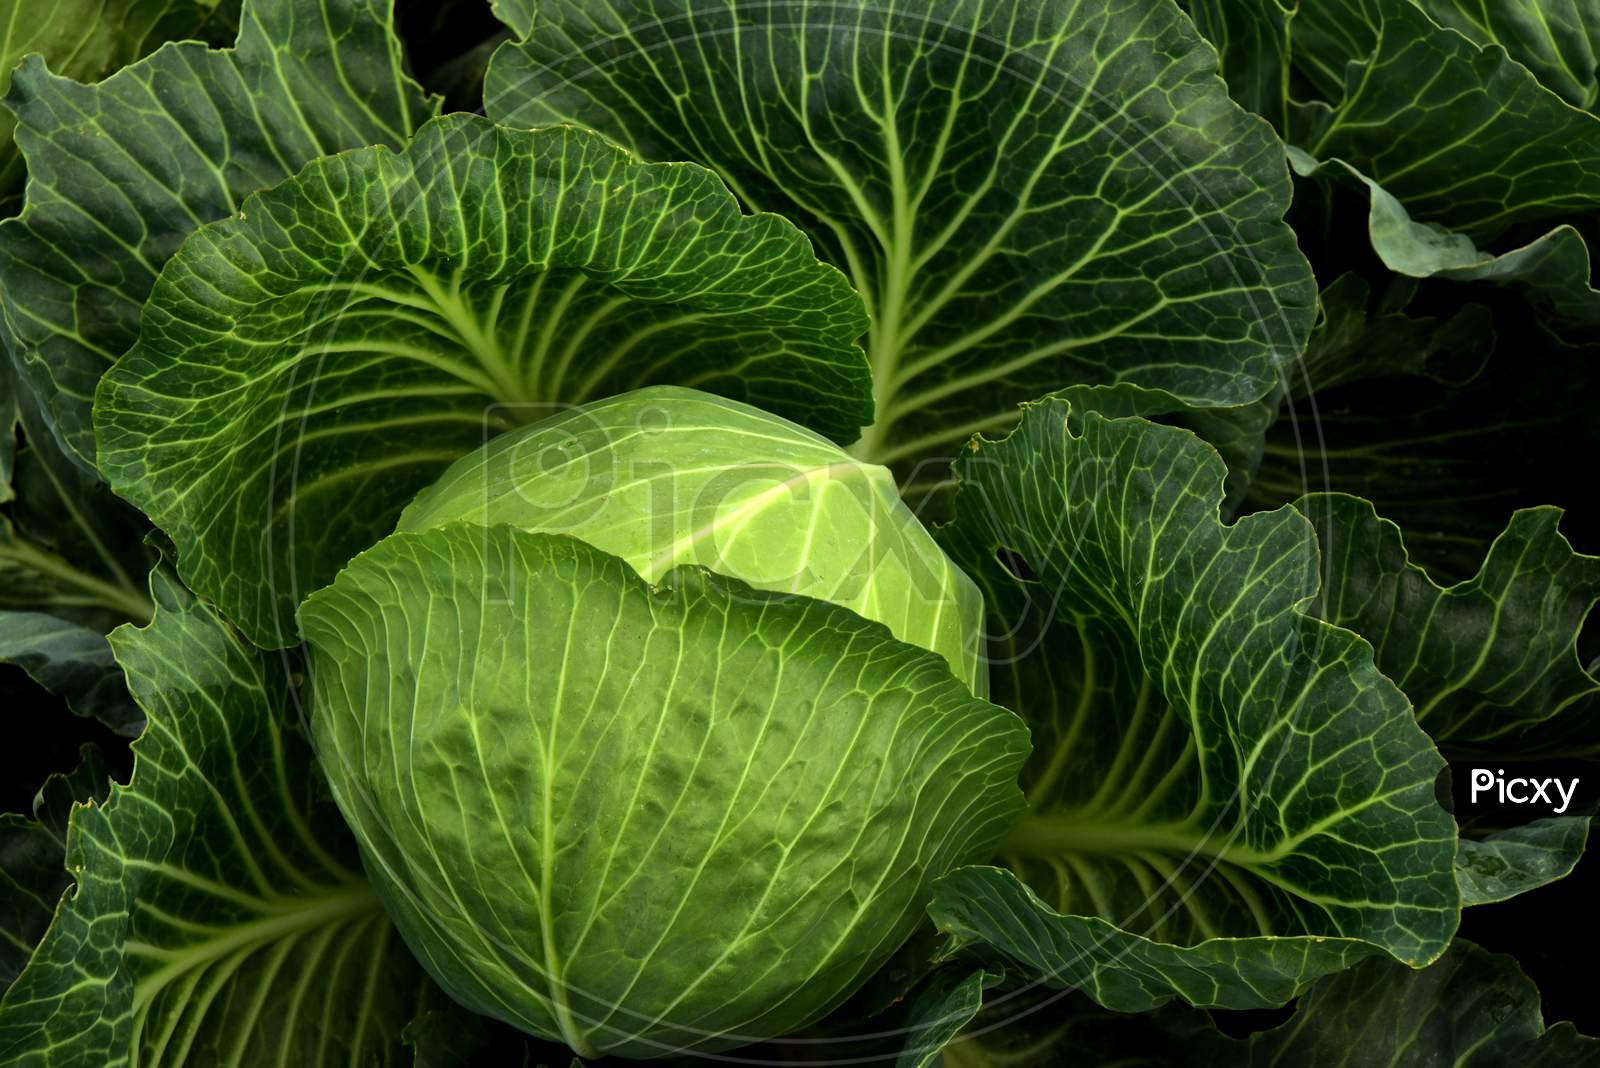 Green and fresh cabbage vegetable